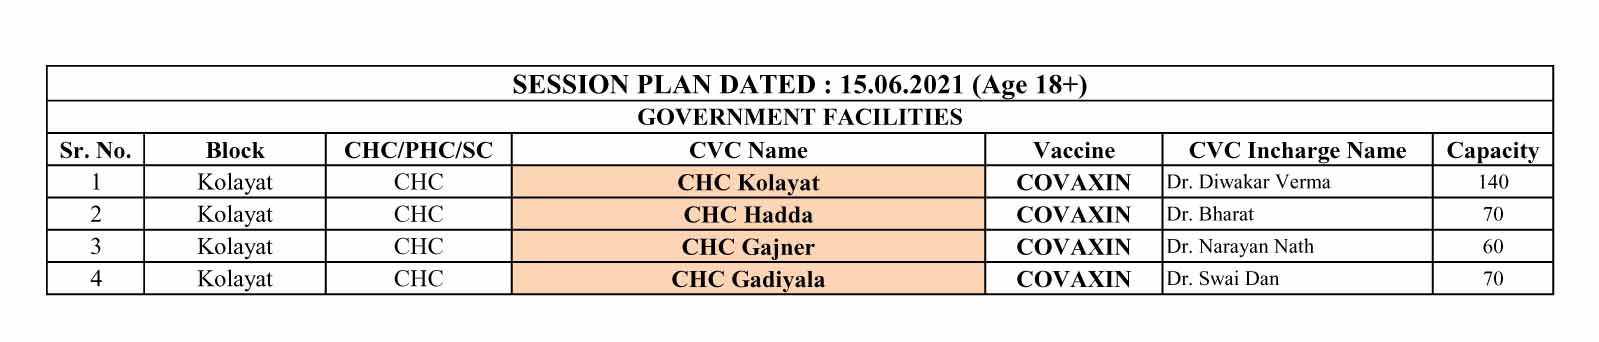 18 Session Plan Dated 15.06.2021 copy